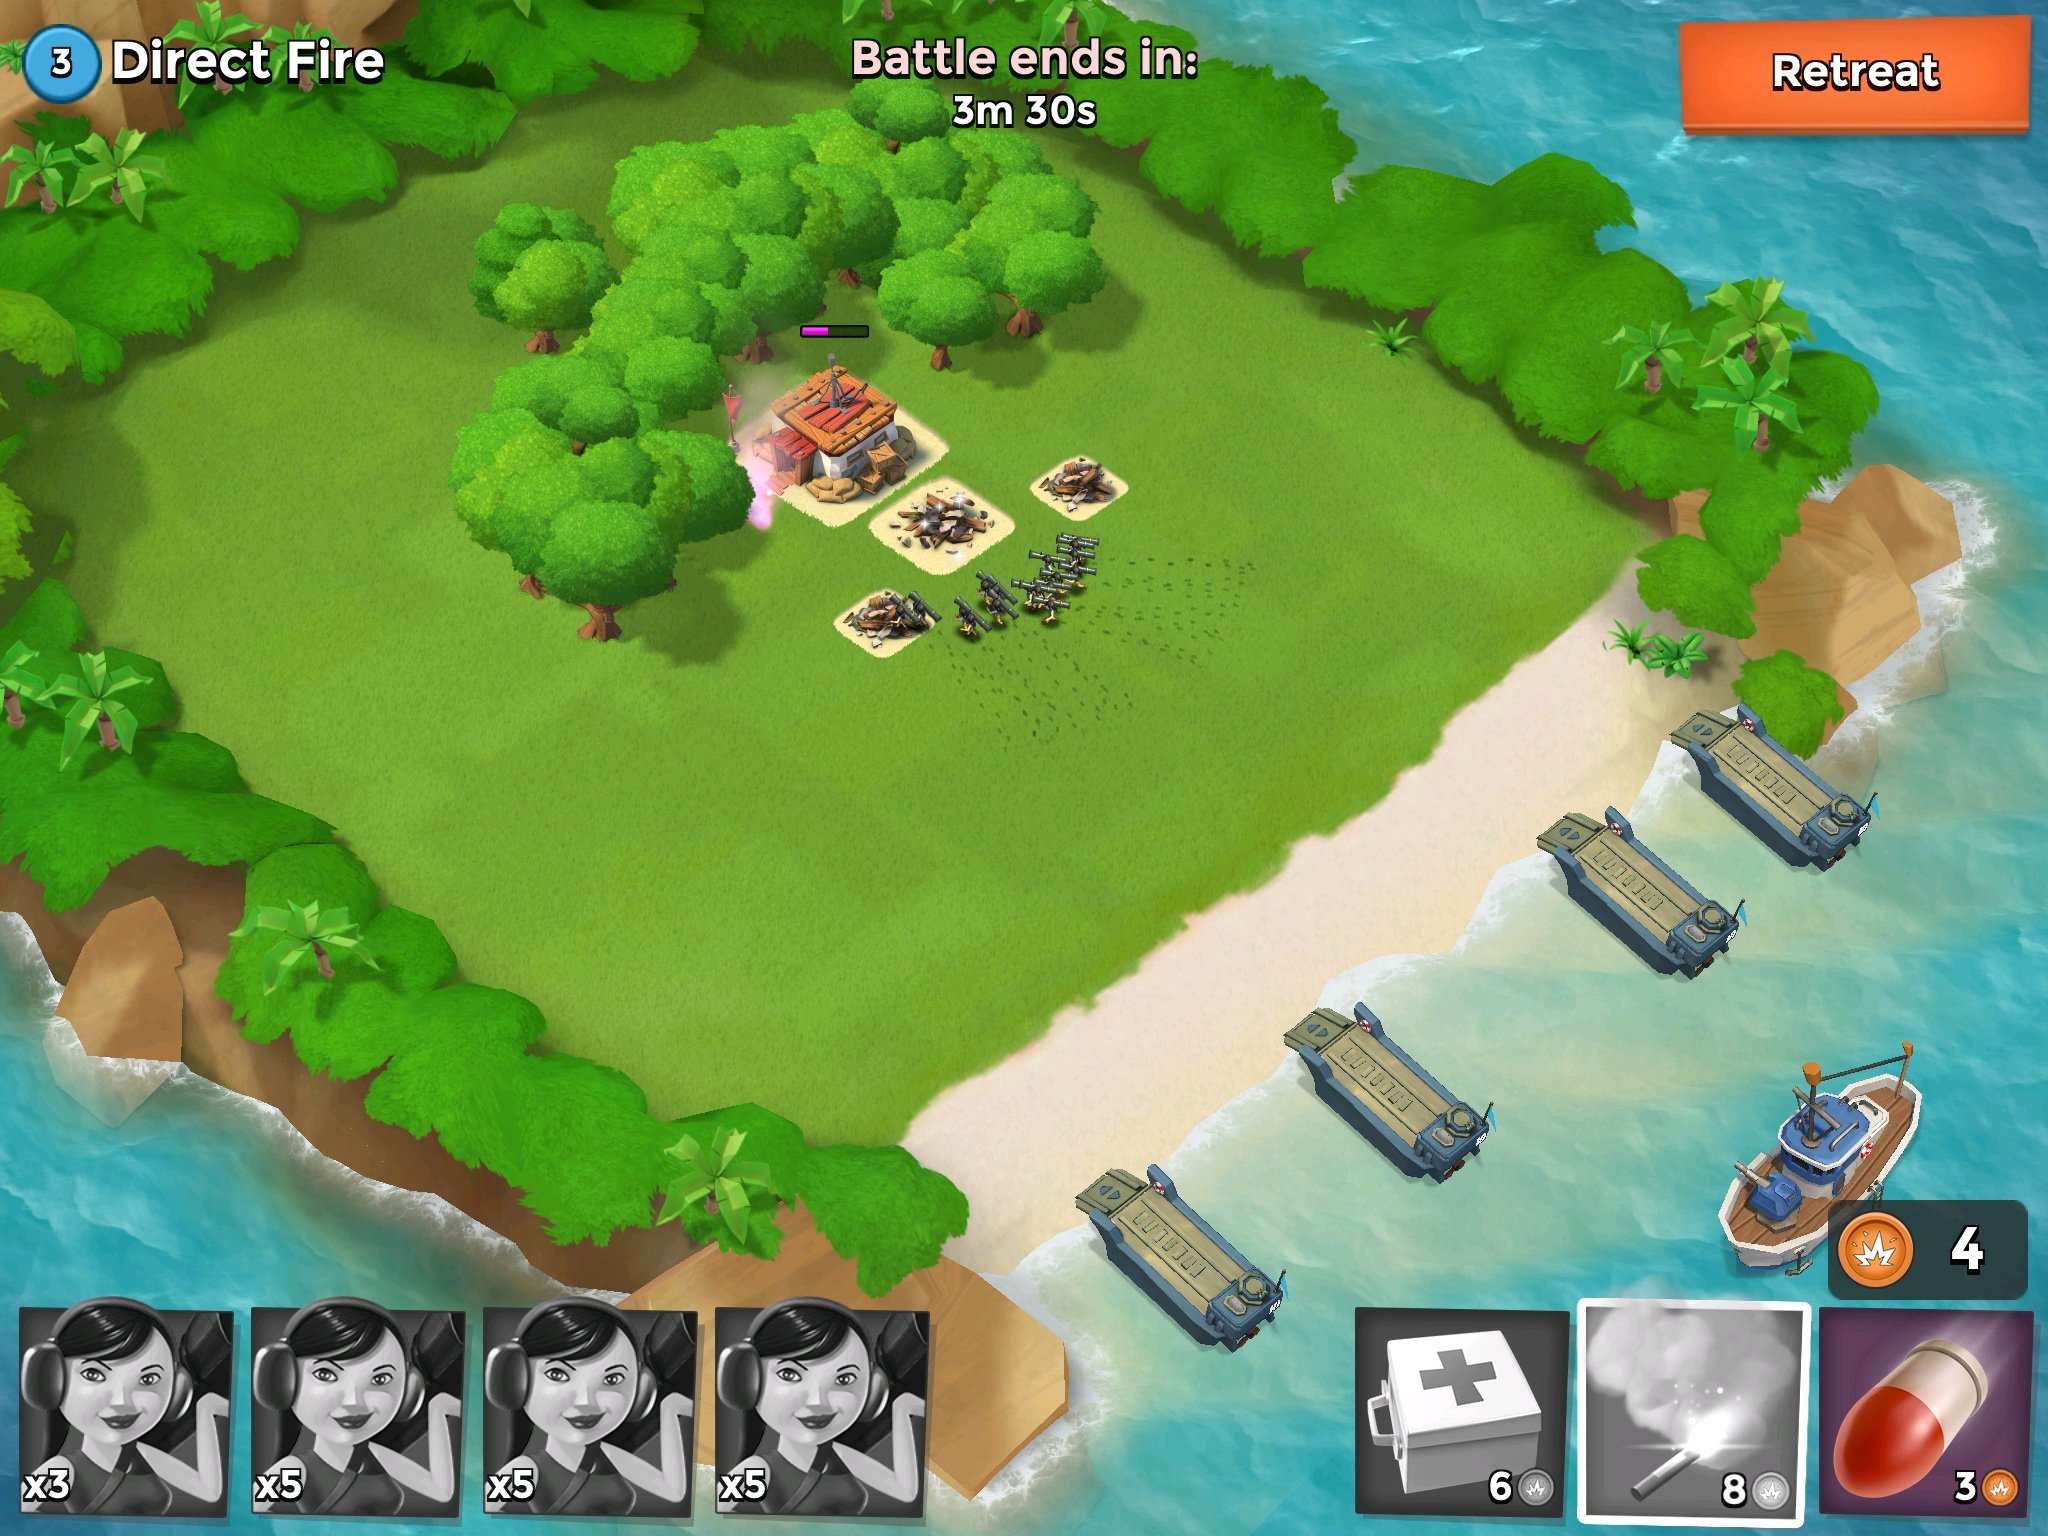 Boom Beach: Top 10 tips and tricks to defeating the Blackguards without spending tons of real cash!